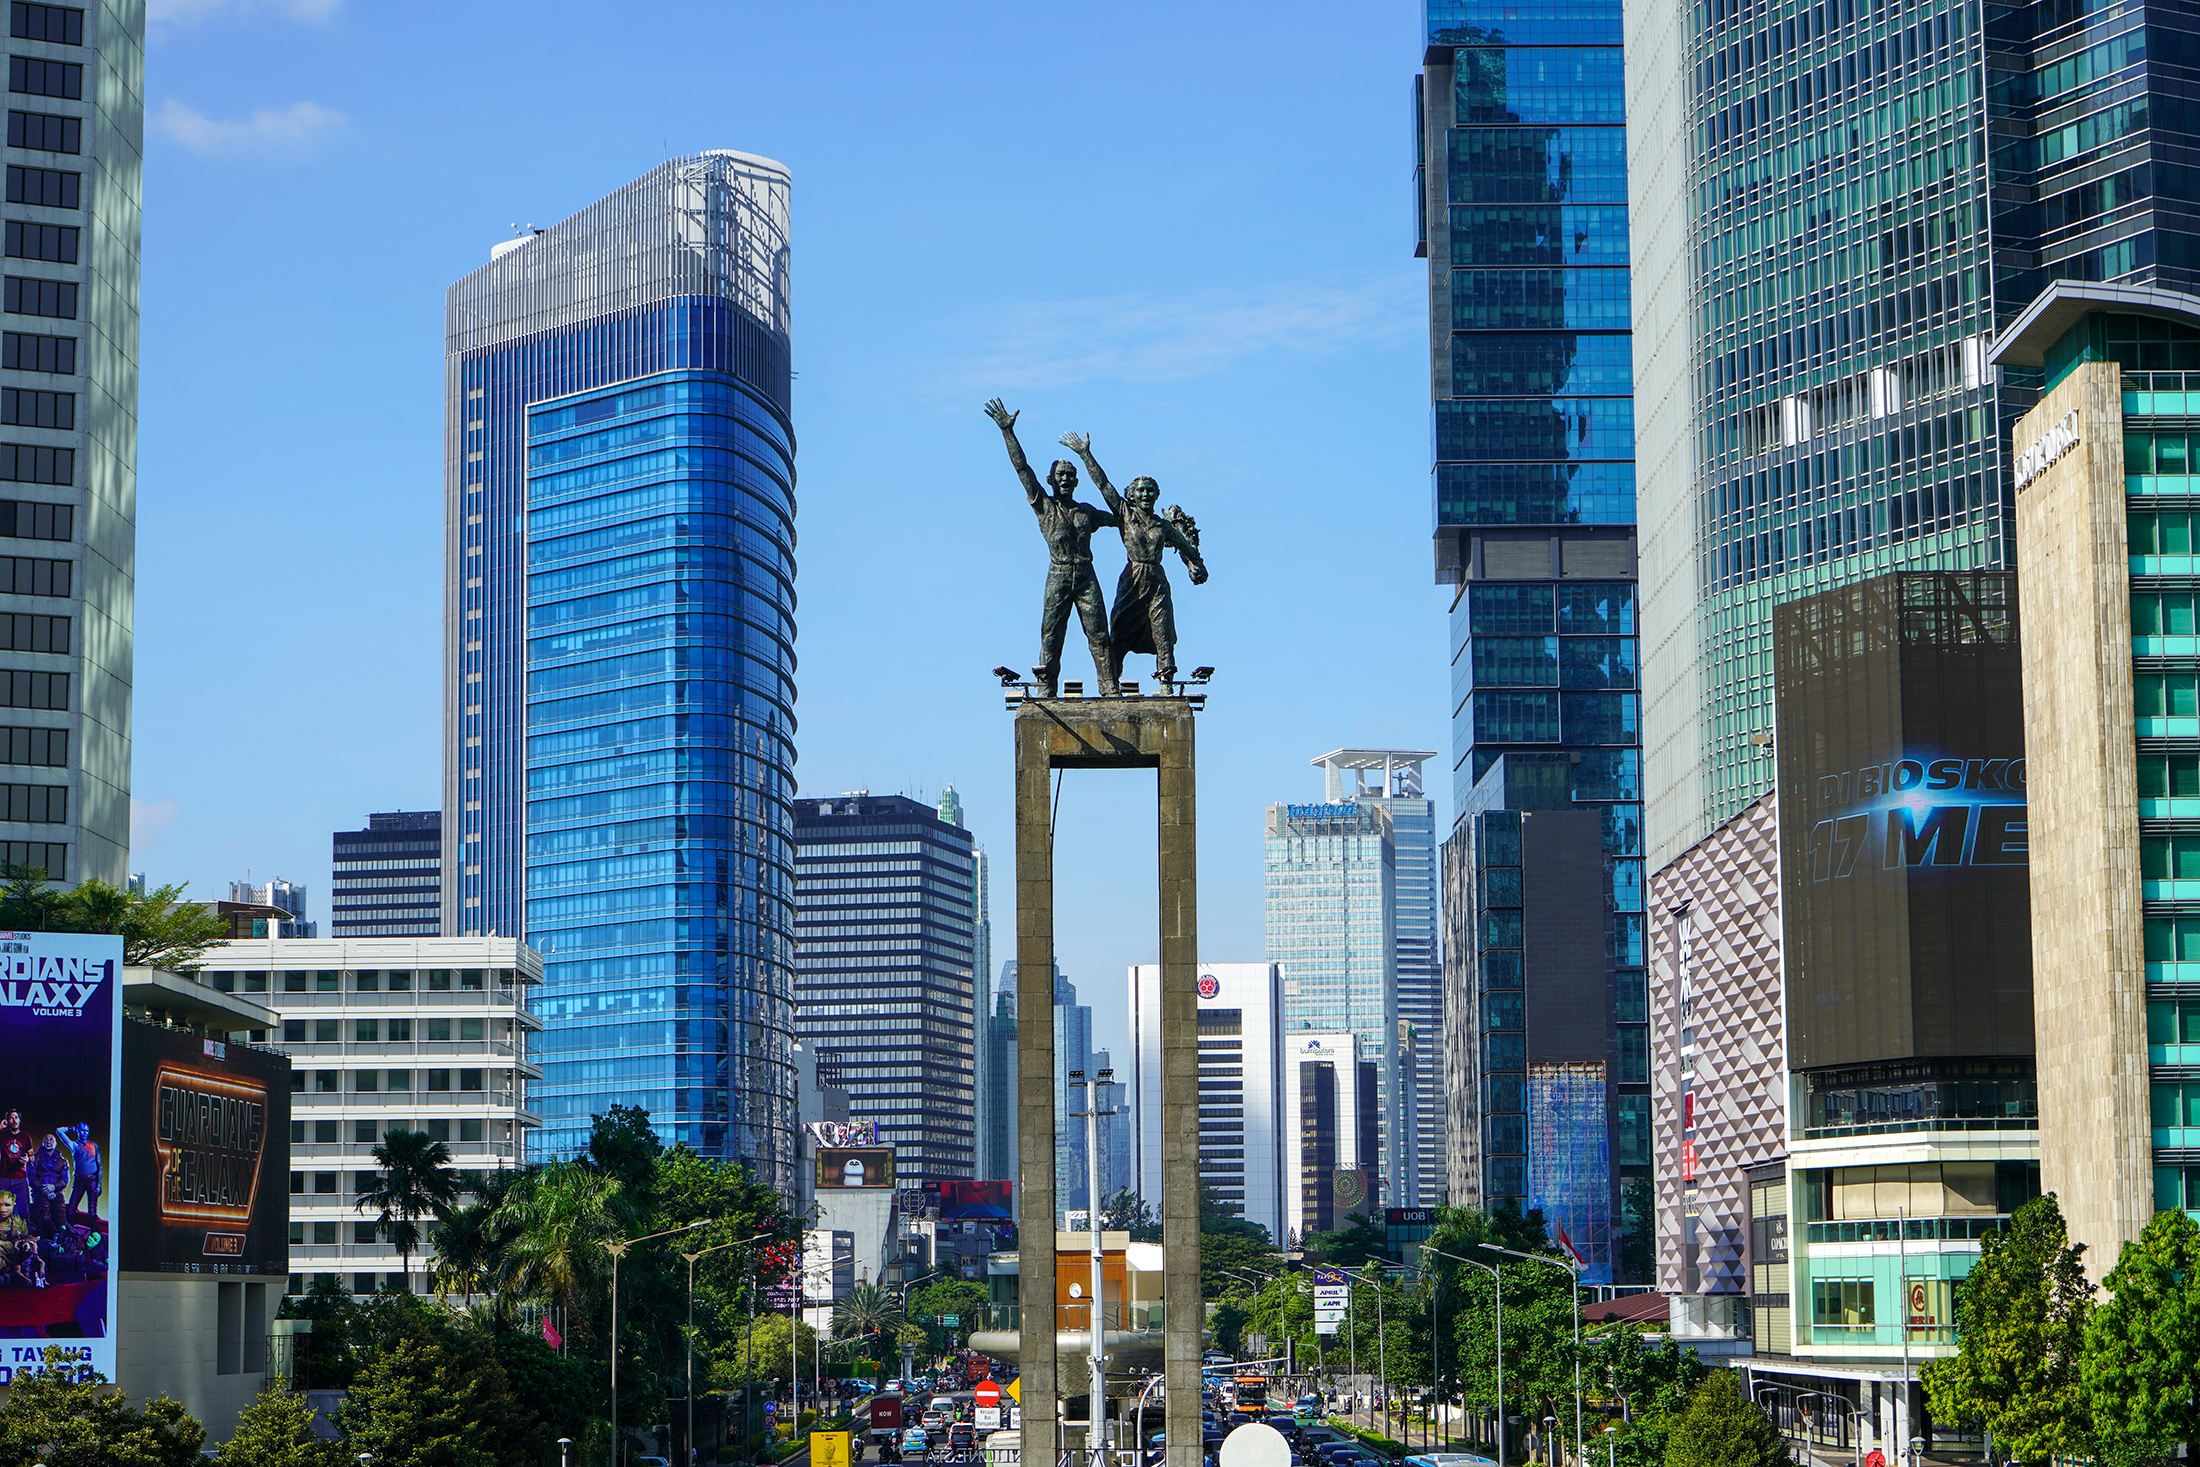 Crypto firms must face sandbox evaluation before operating: Indonesian gov’t